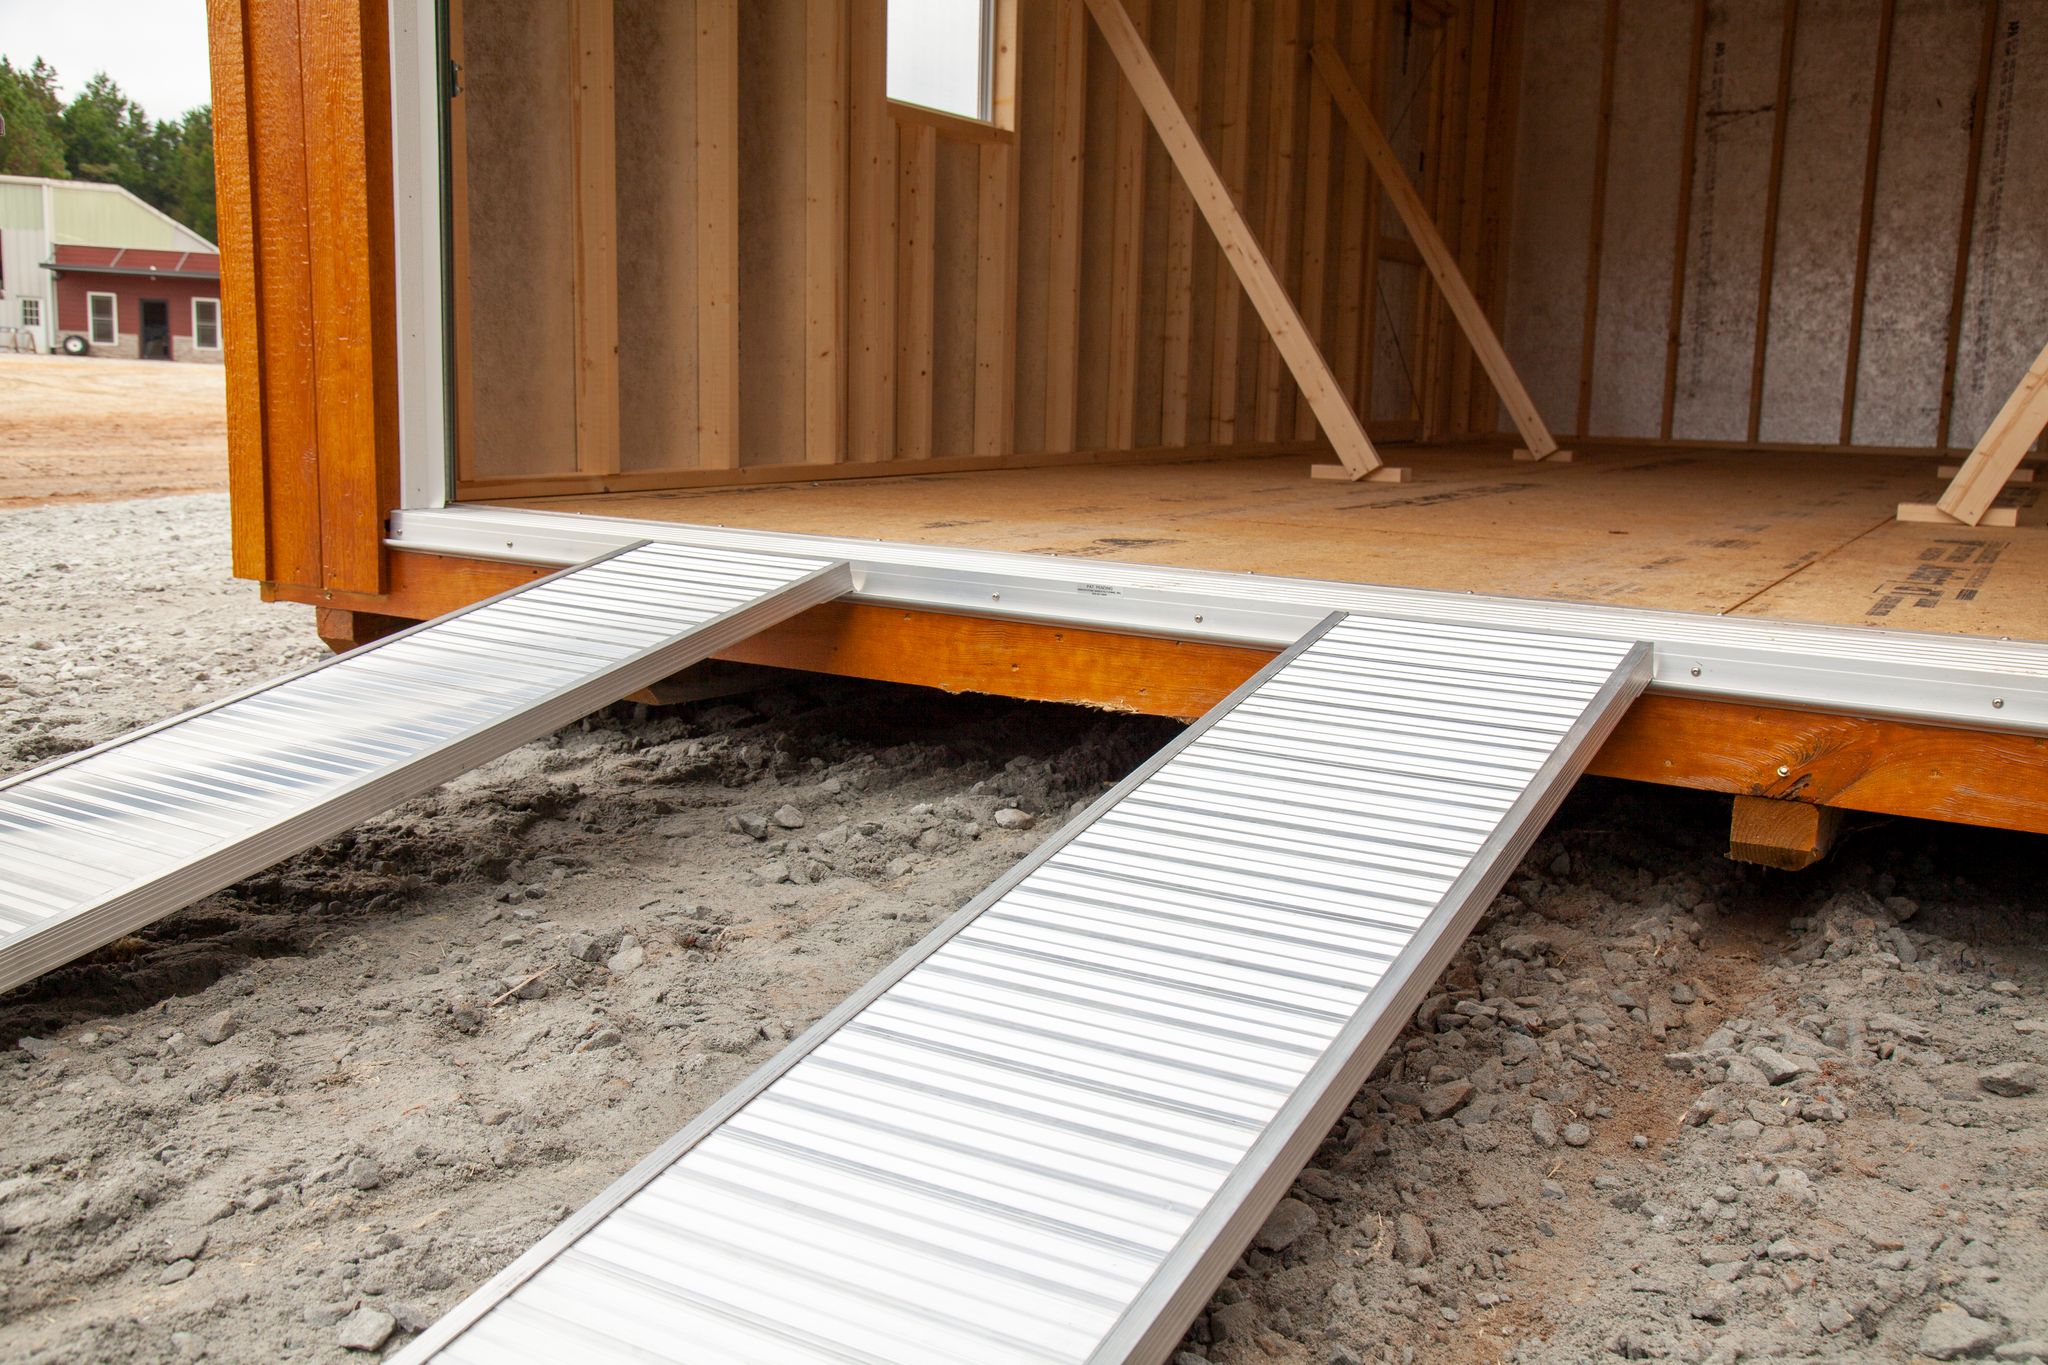 A ramp leading into an outdoor building for a shed or workshop.